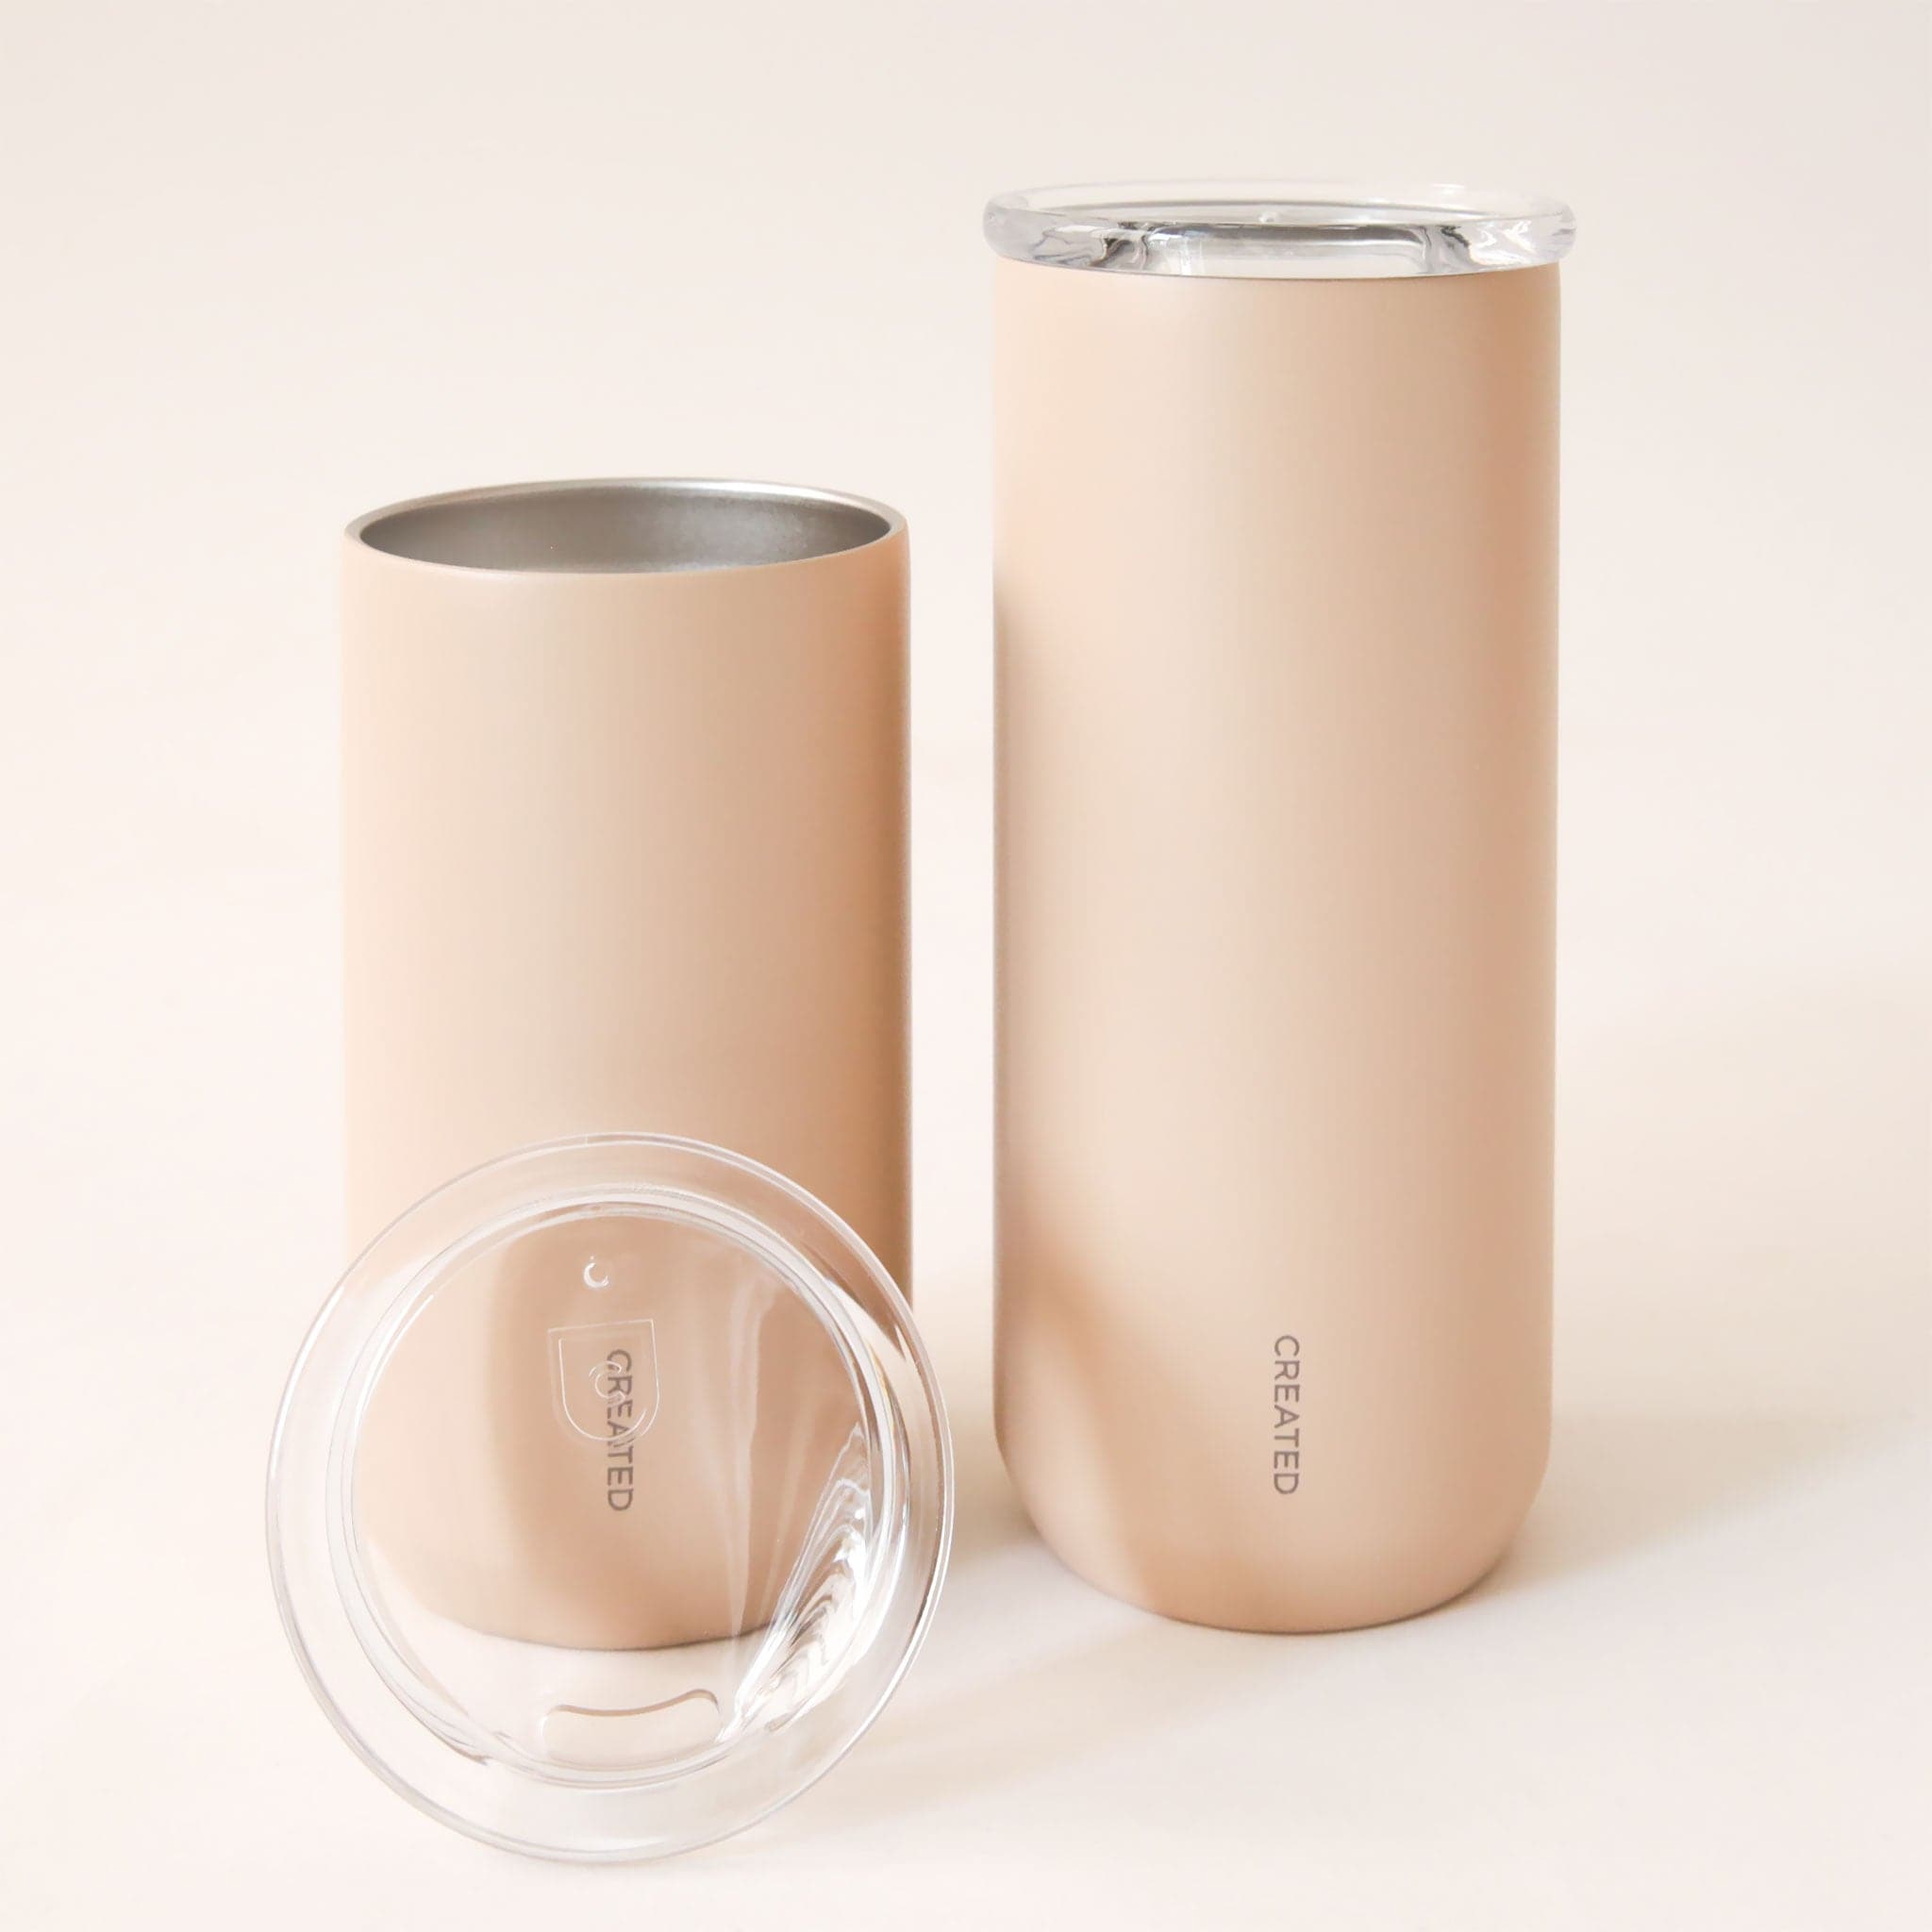 A bullet shaped to-go tumbler in a light shade of pink.